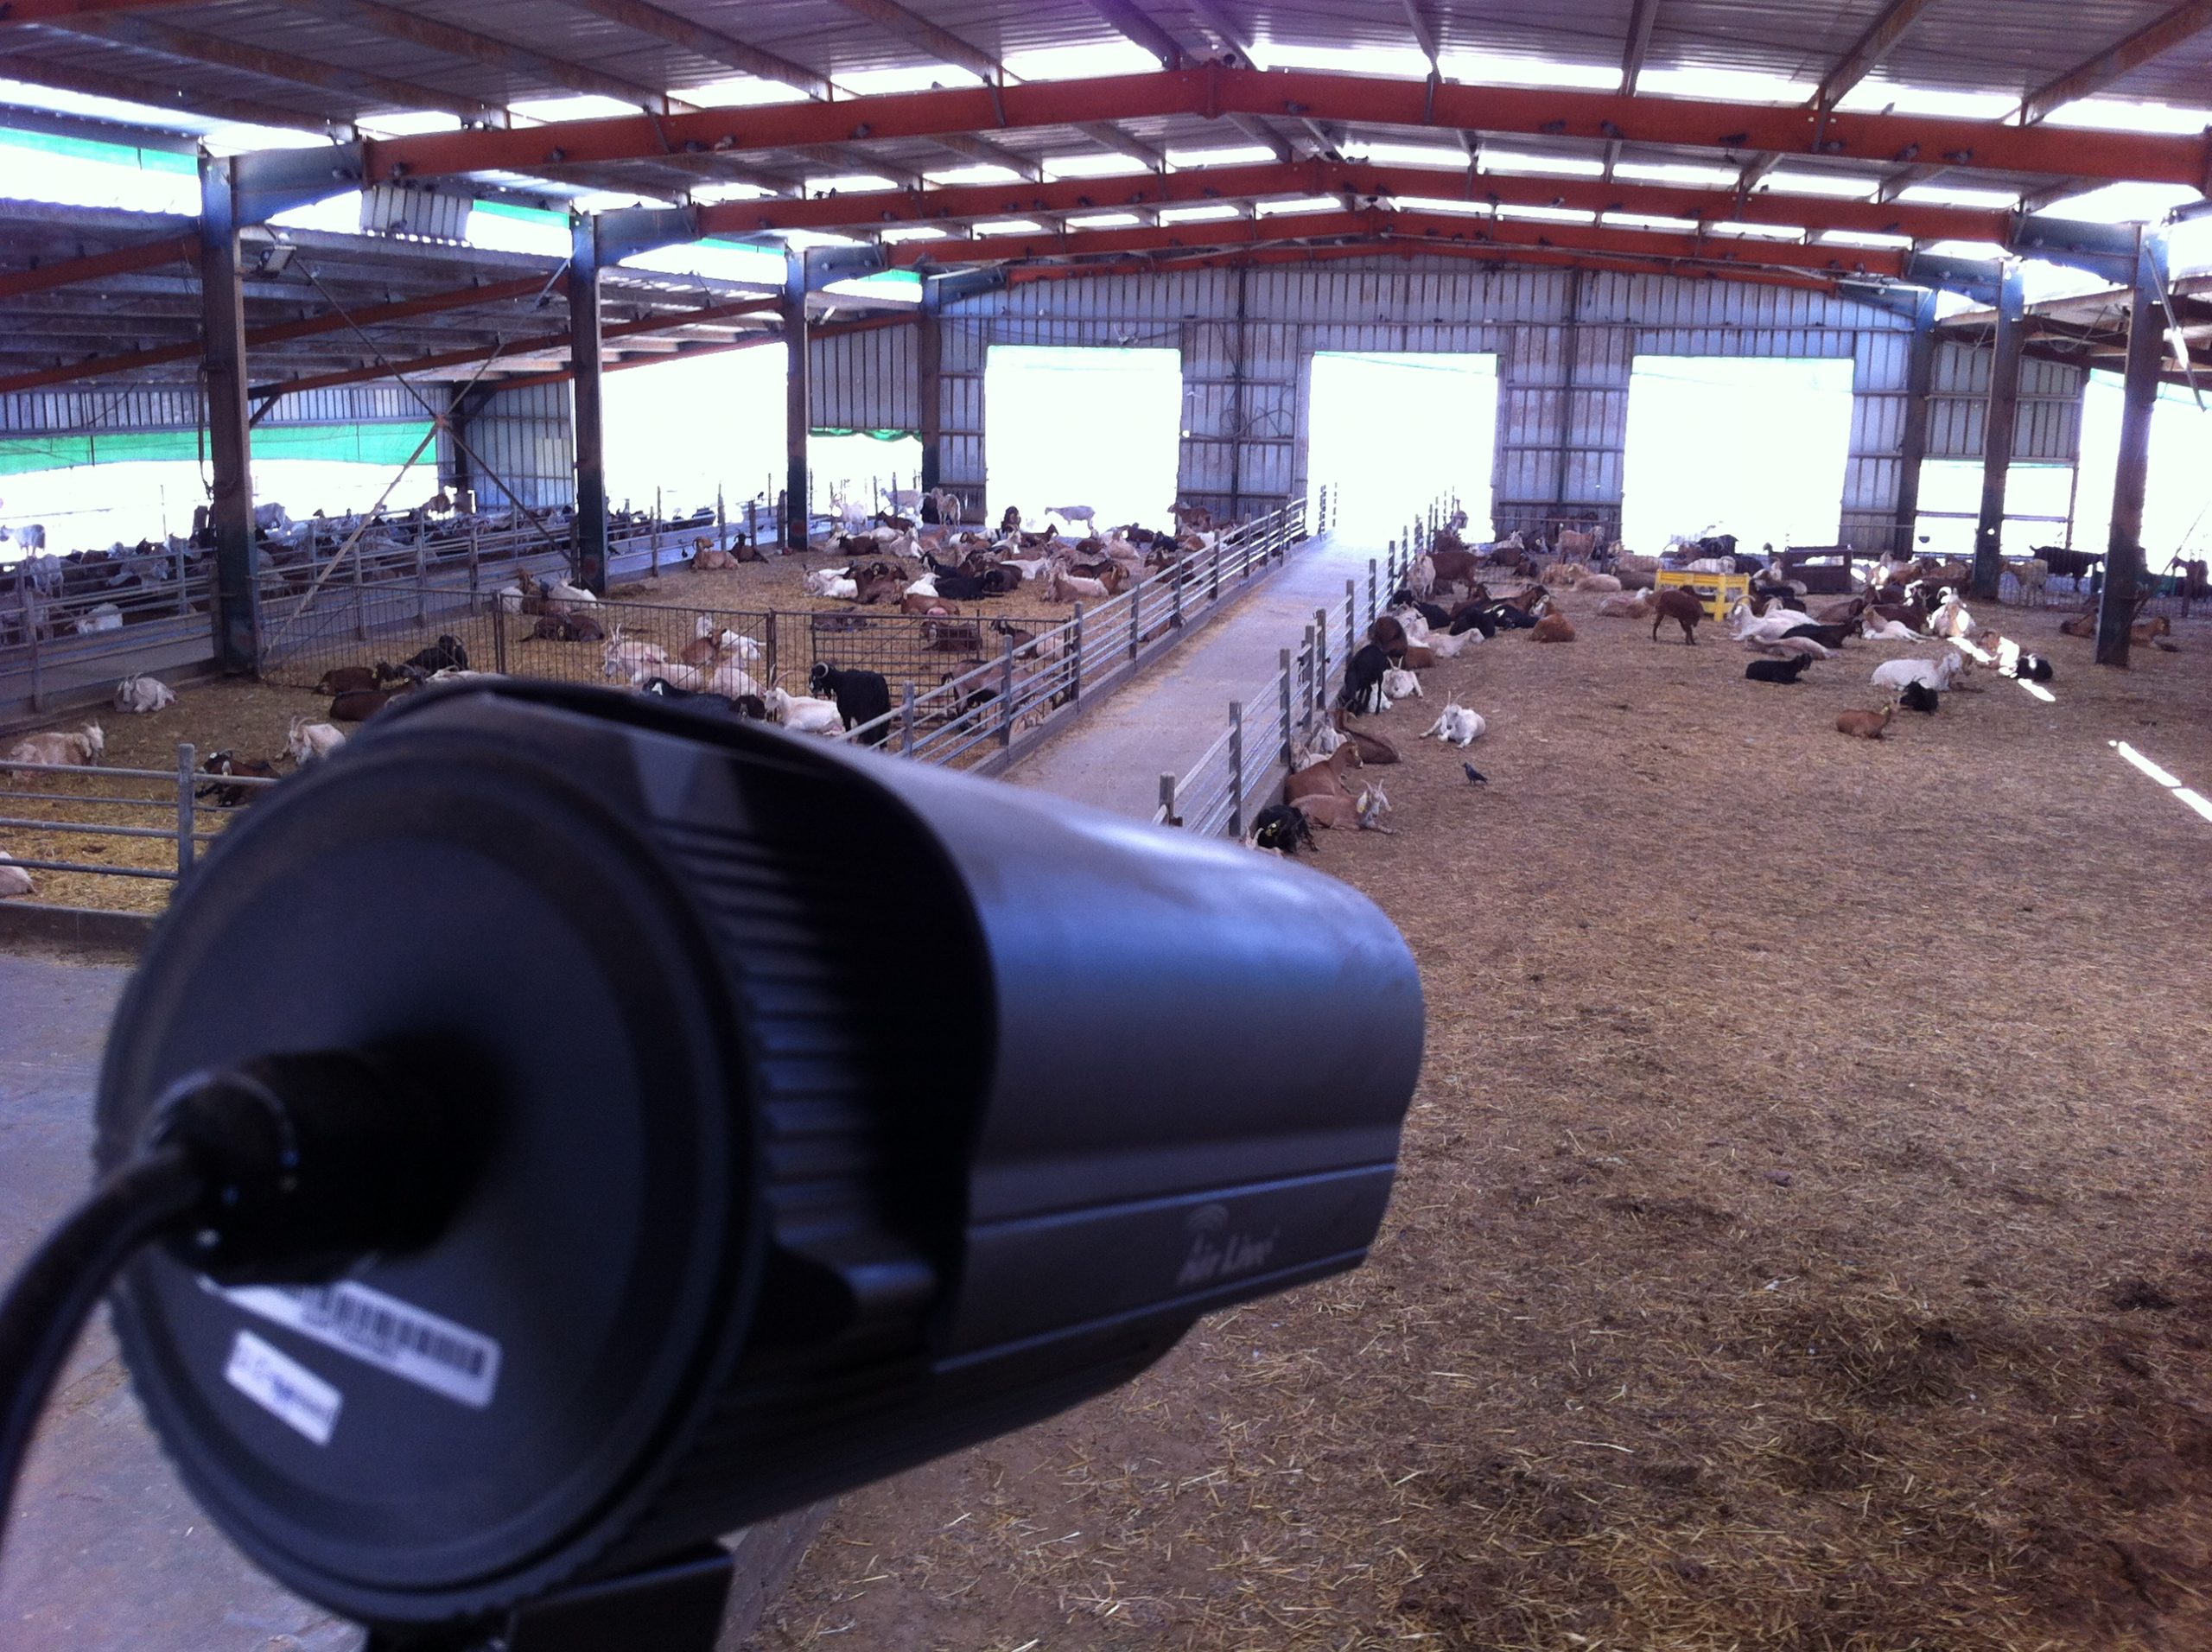 Wireless Network for Internet Access and Video Security Solution in a Farm